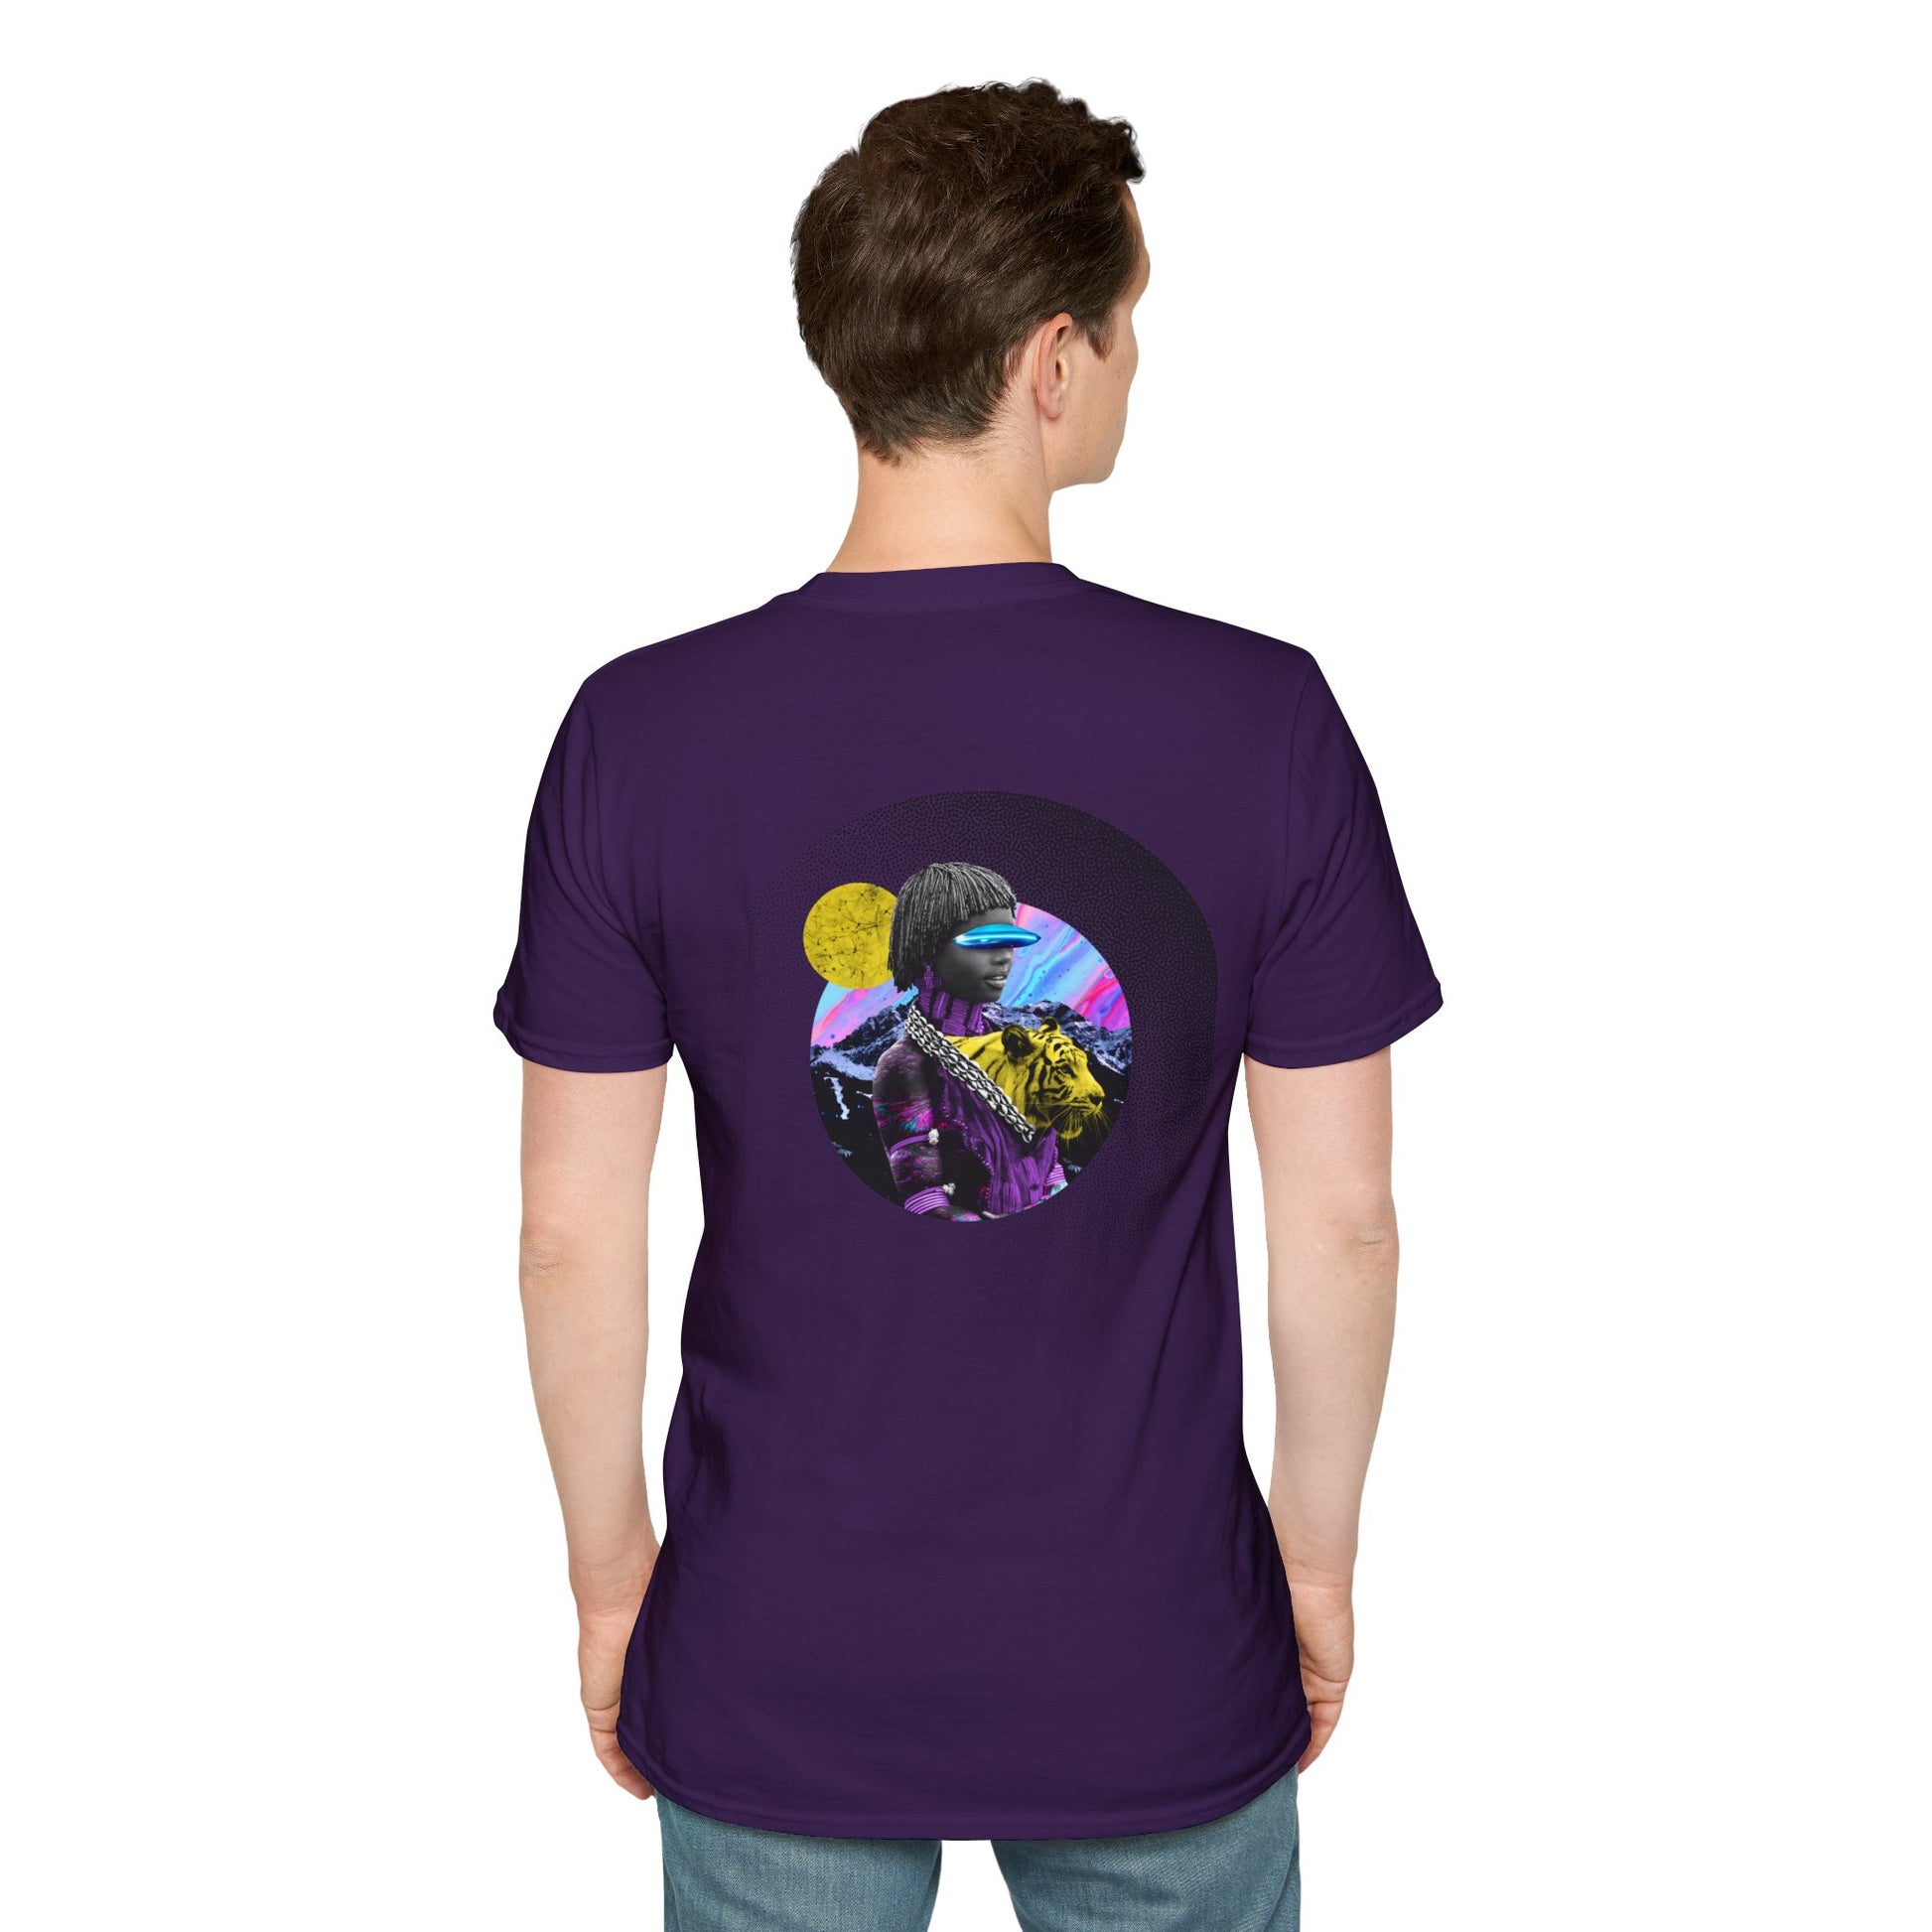 Violet T-shirt with a collage of an African woman with futuristic glasses and a yellow tiger